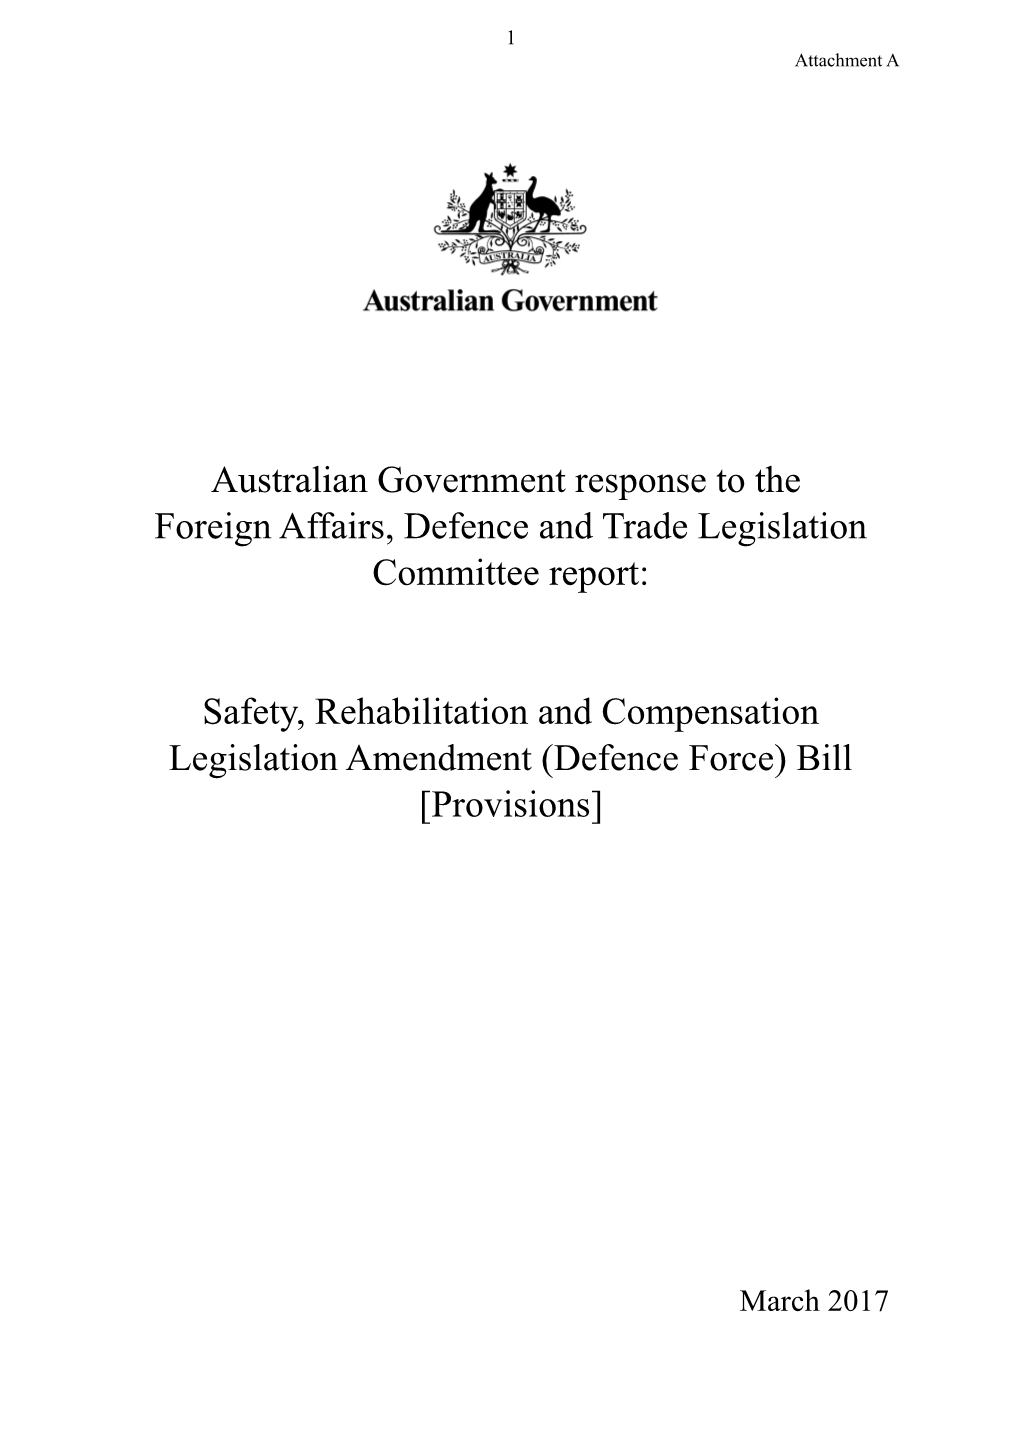 Australian Government Response to The